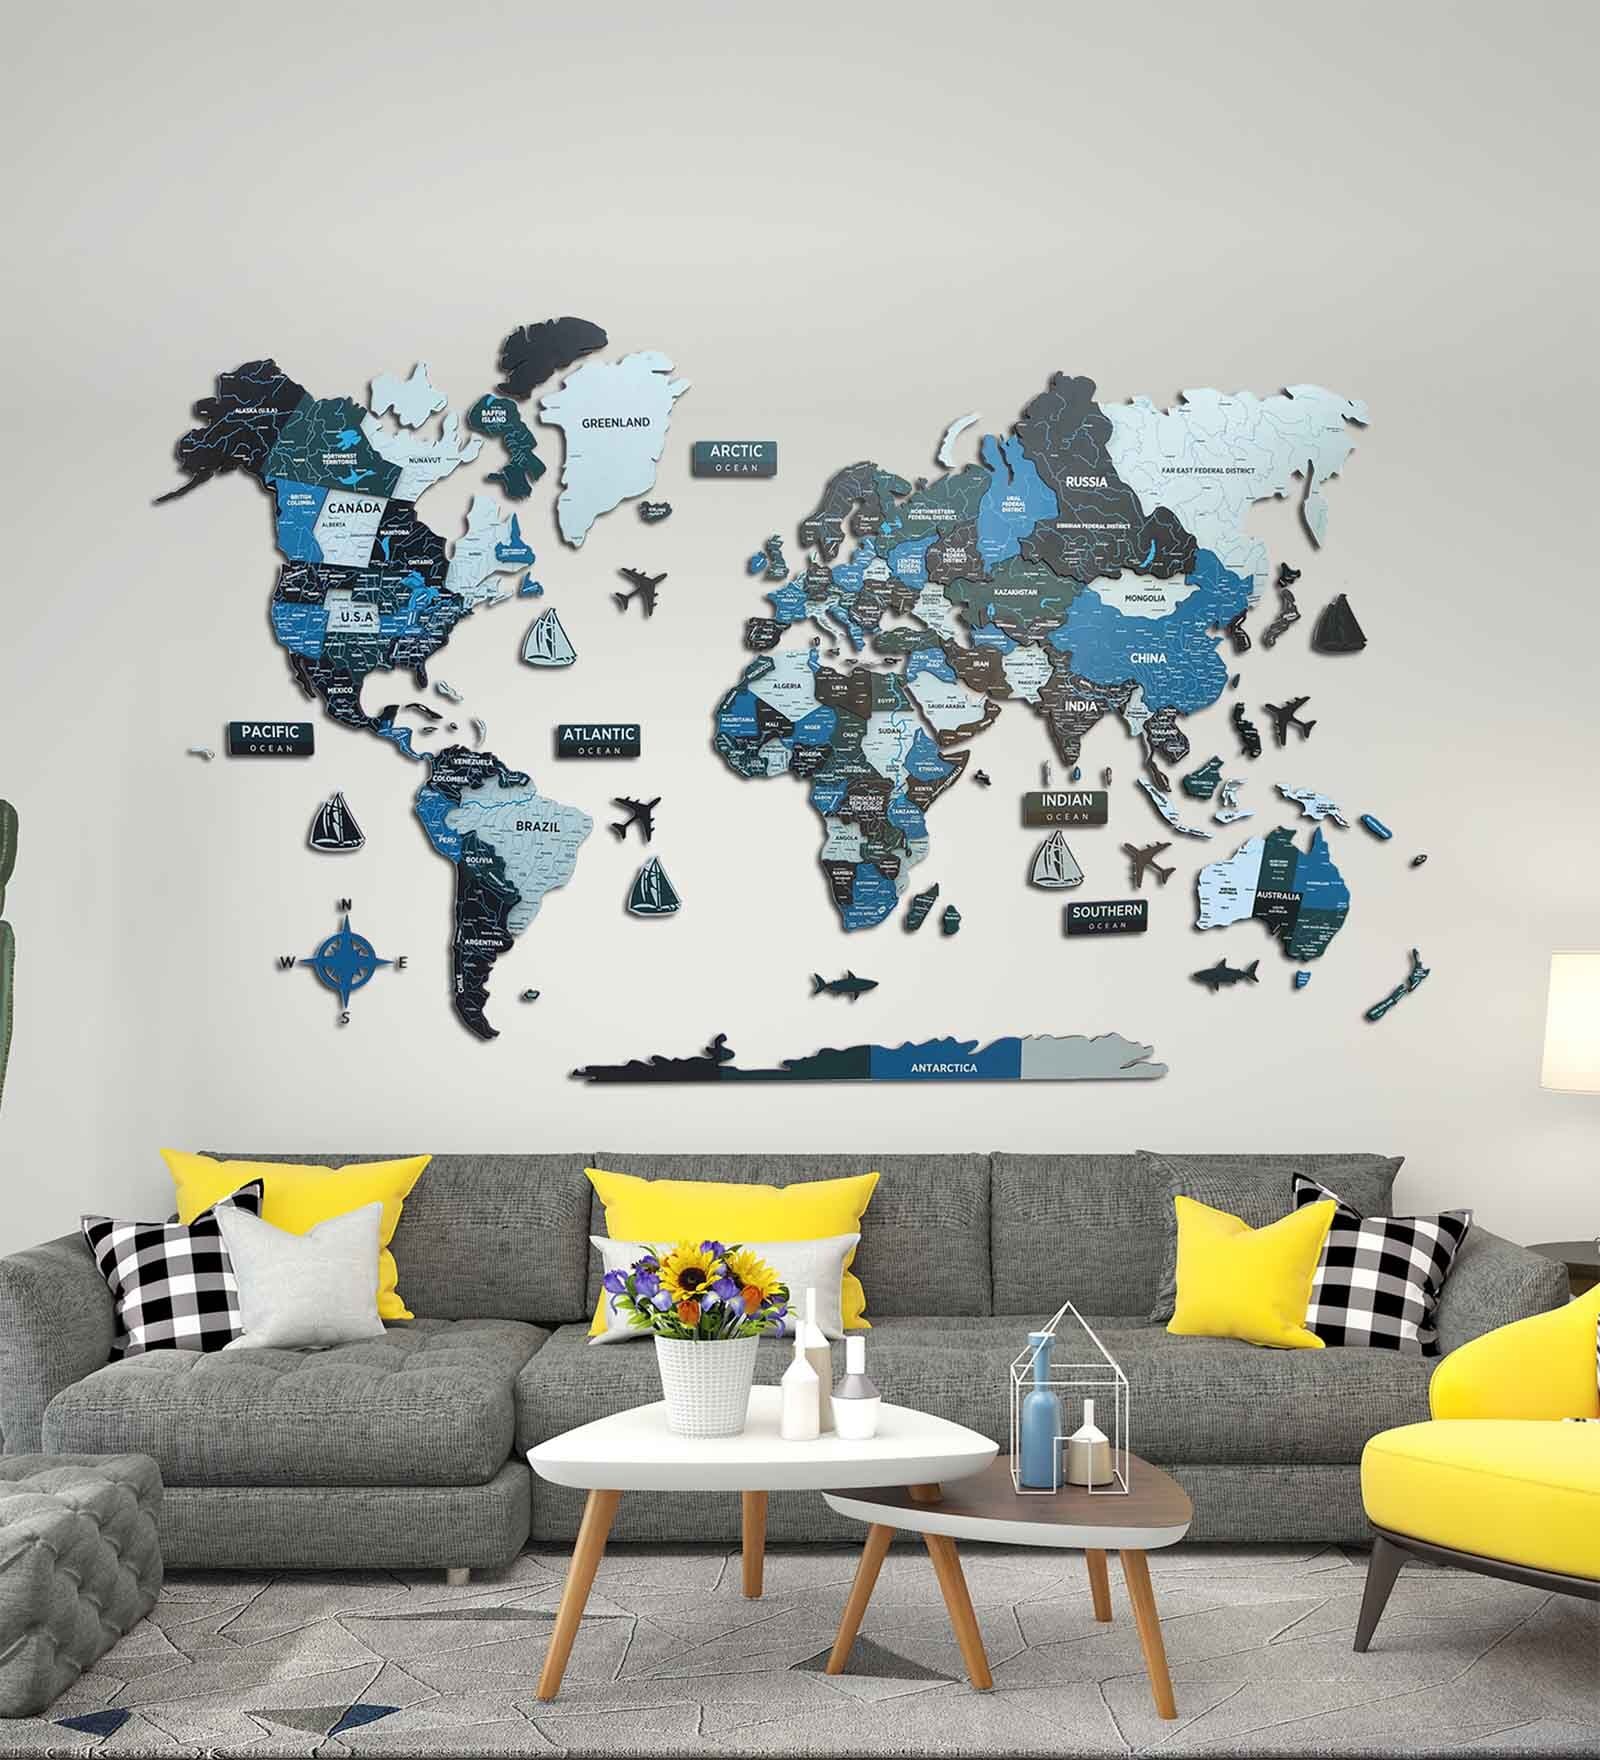 3D Birch Wood Oxford World Map In 79 x 47 Inches